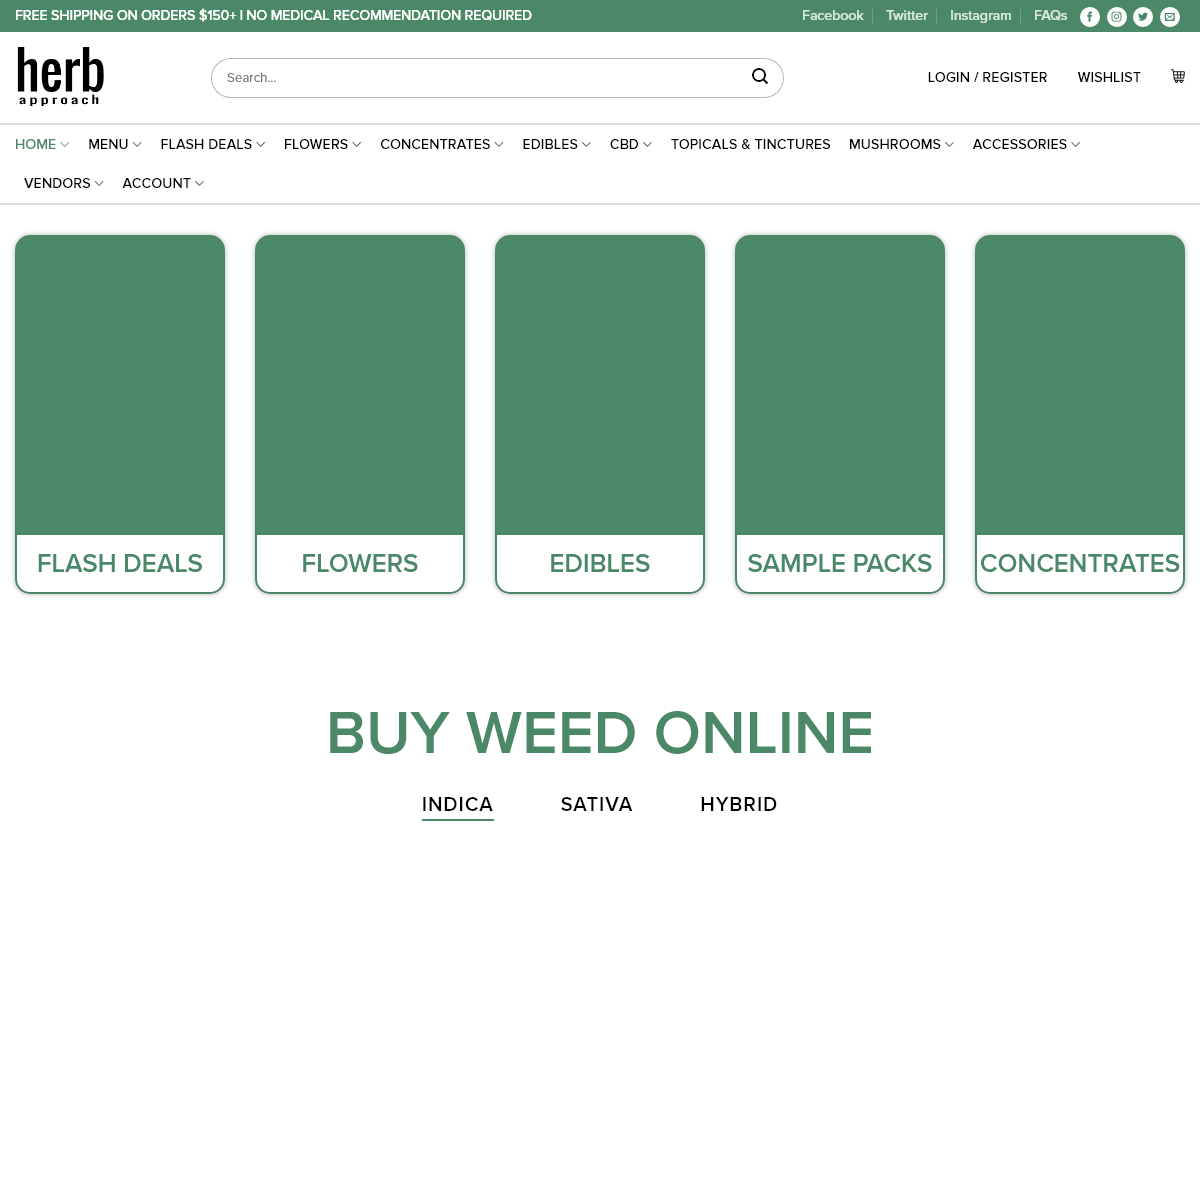 A complete backup of herbapproach.com